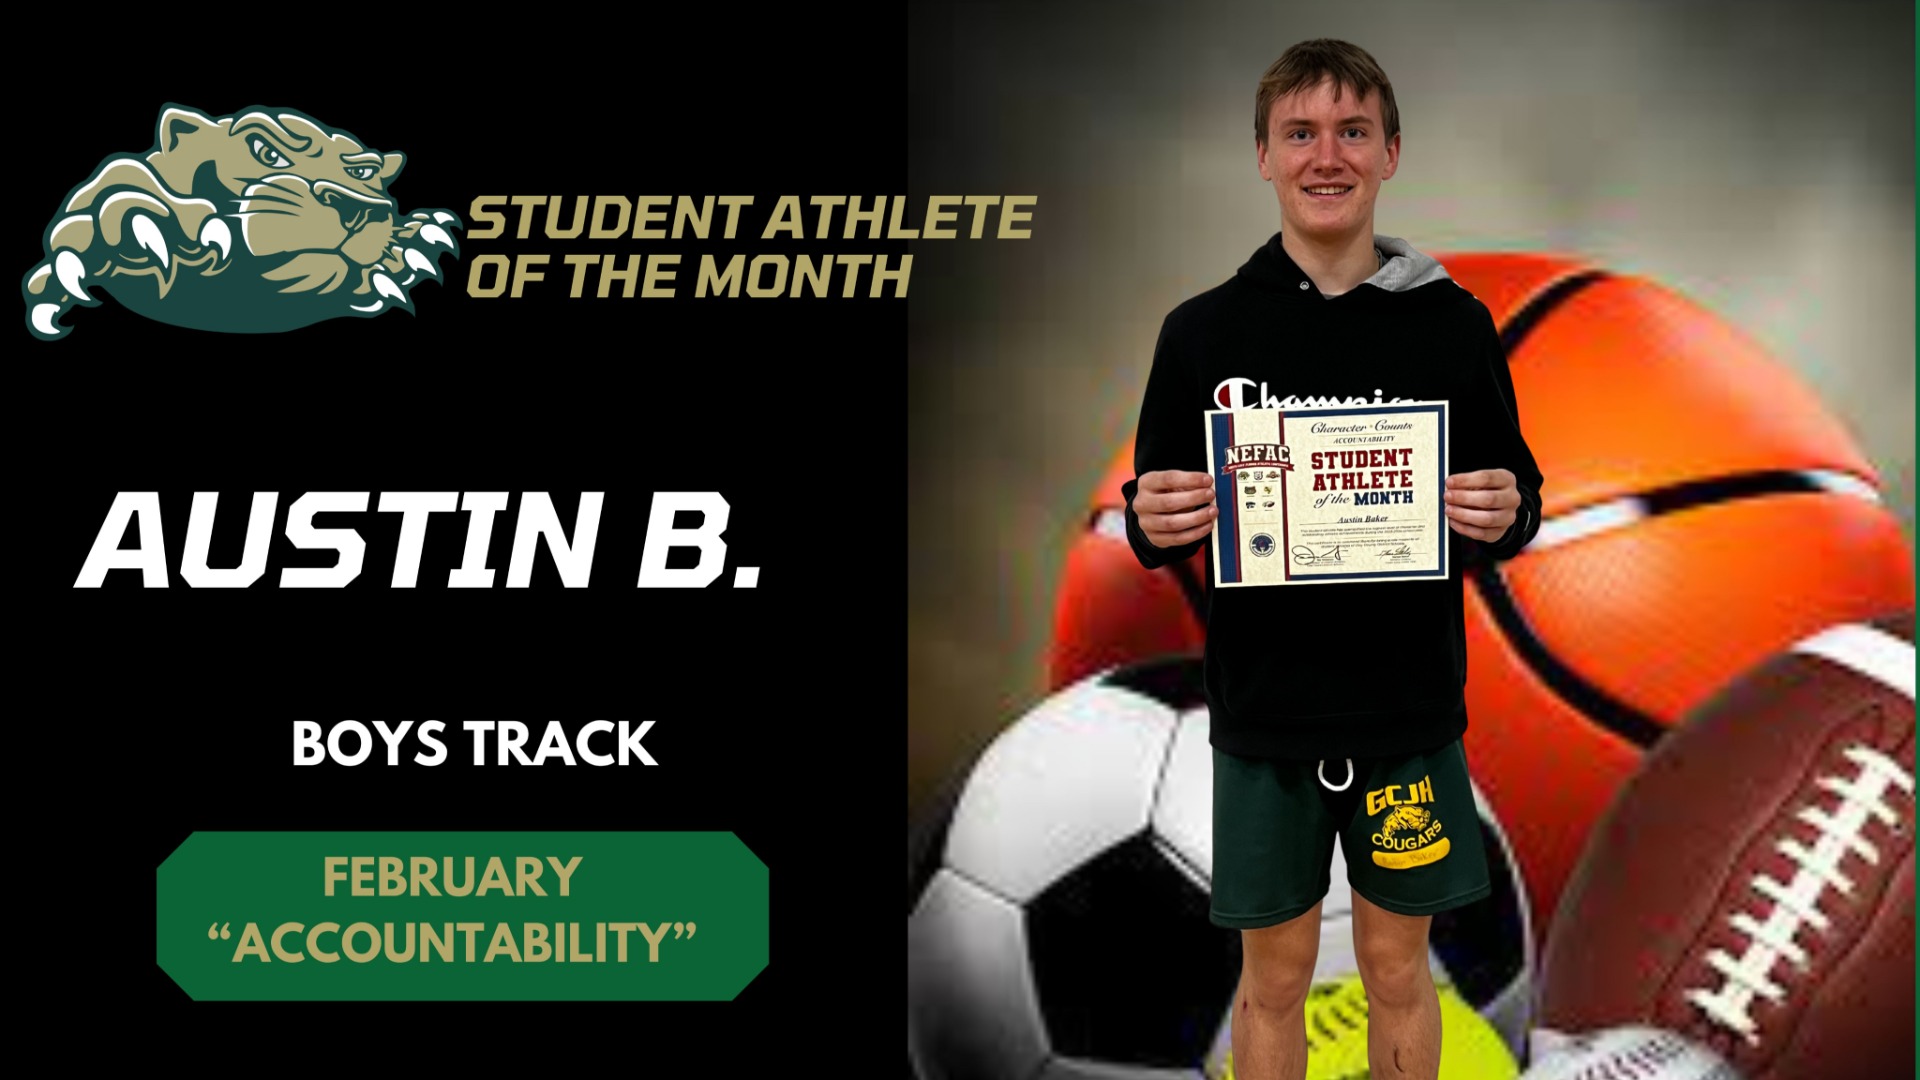 Slide 1 - STUDENT ATHLETE OF THE MONTH FOR FEBRUARY